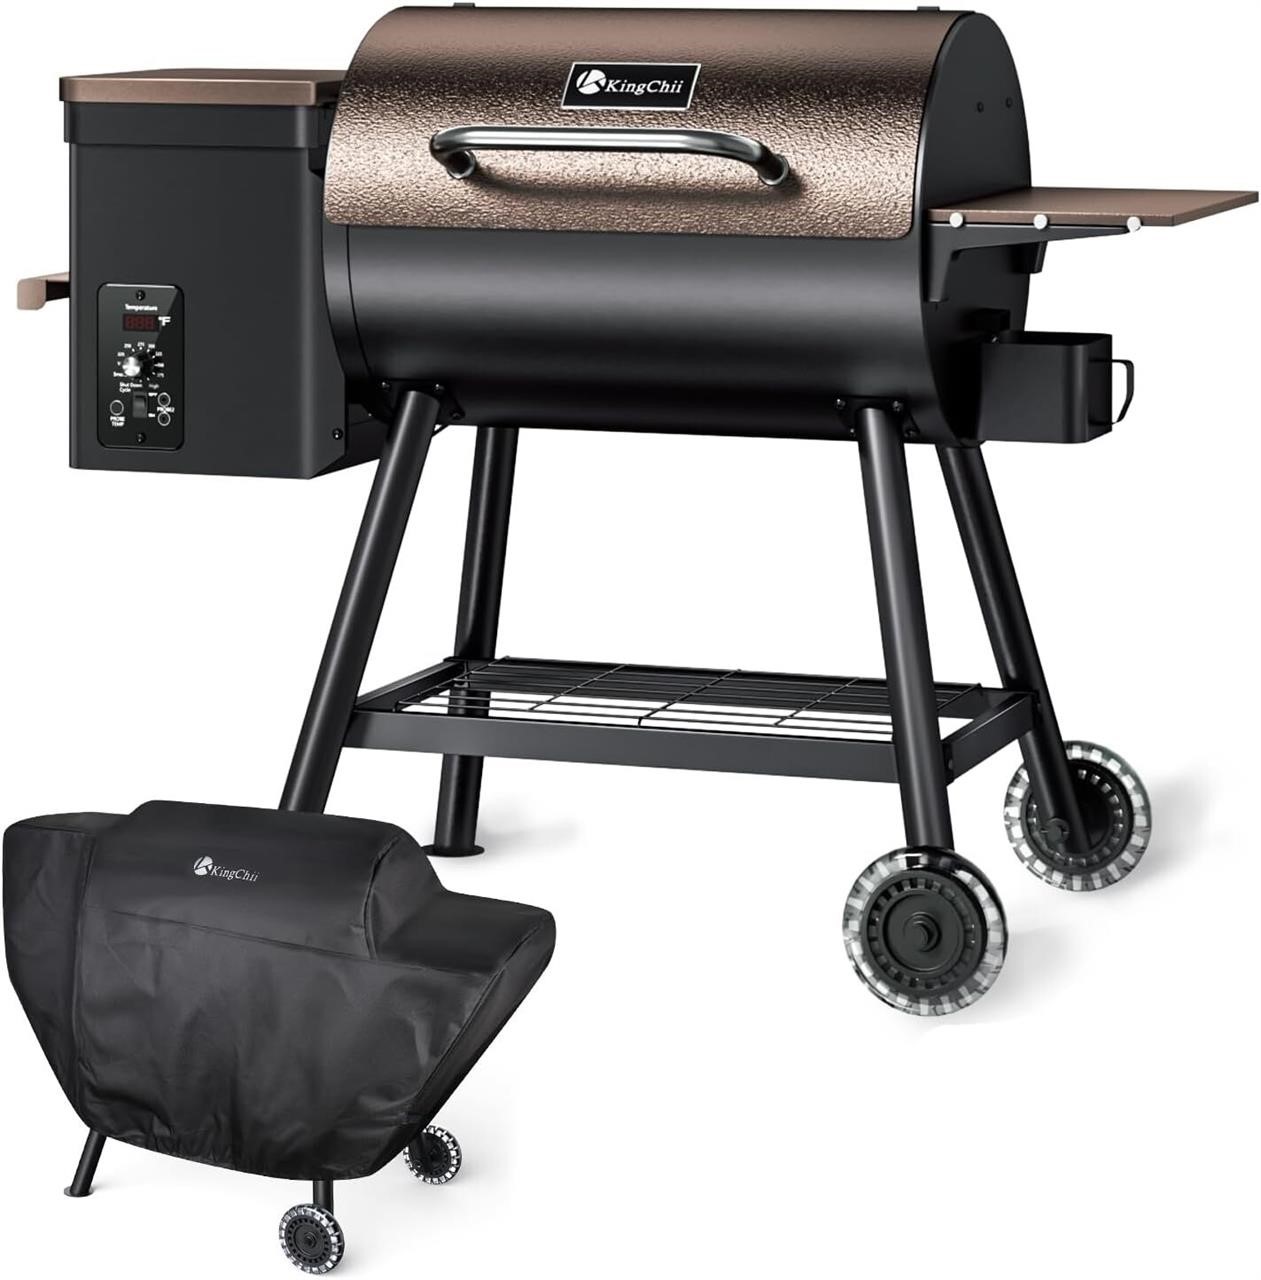 KingChii 456 SQ.IN Pellet Grill Smoker with Shelf